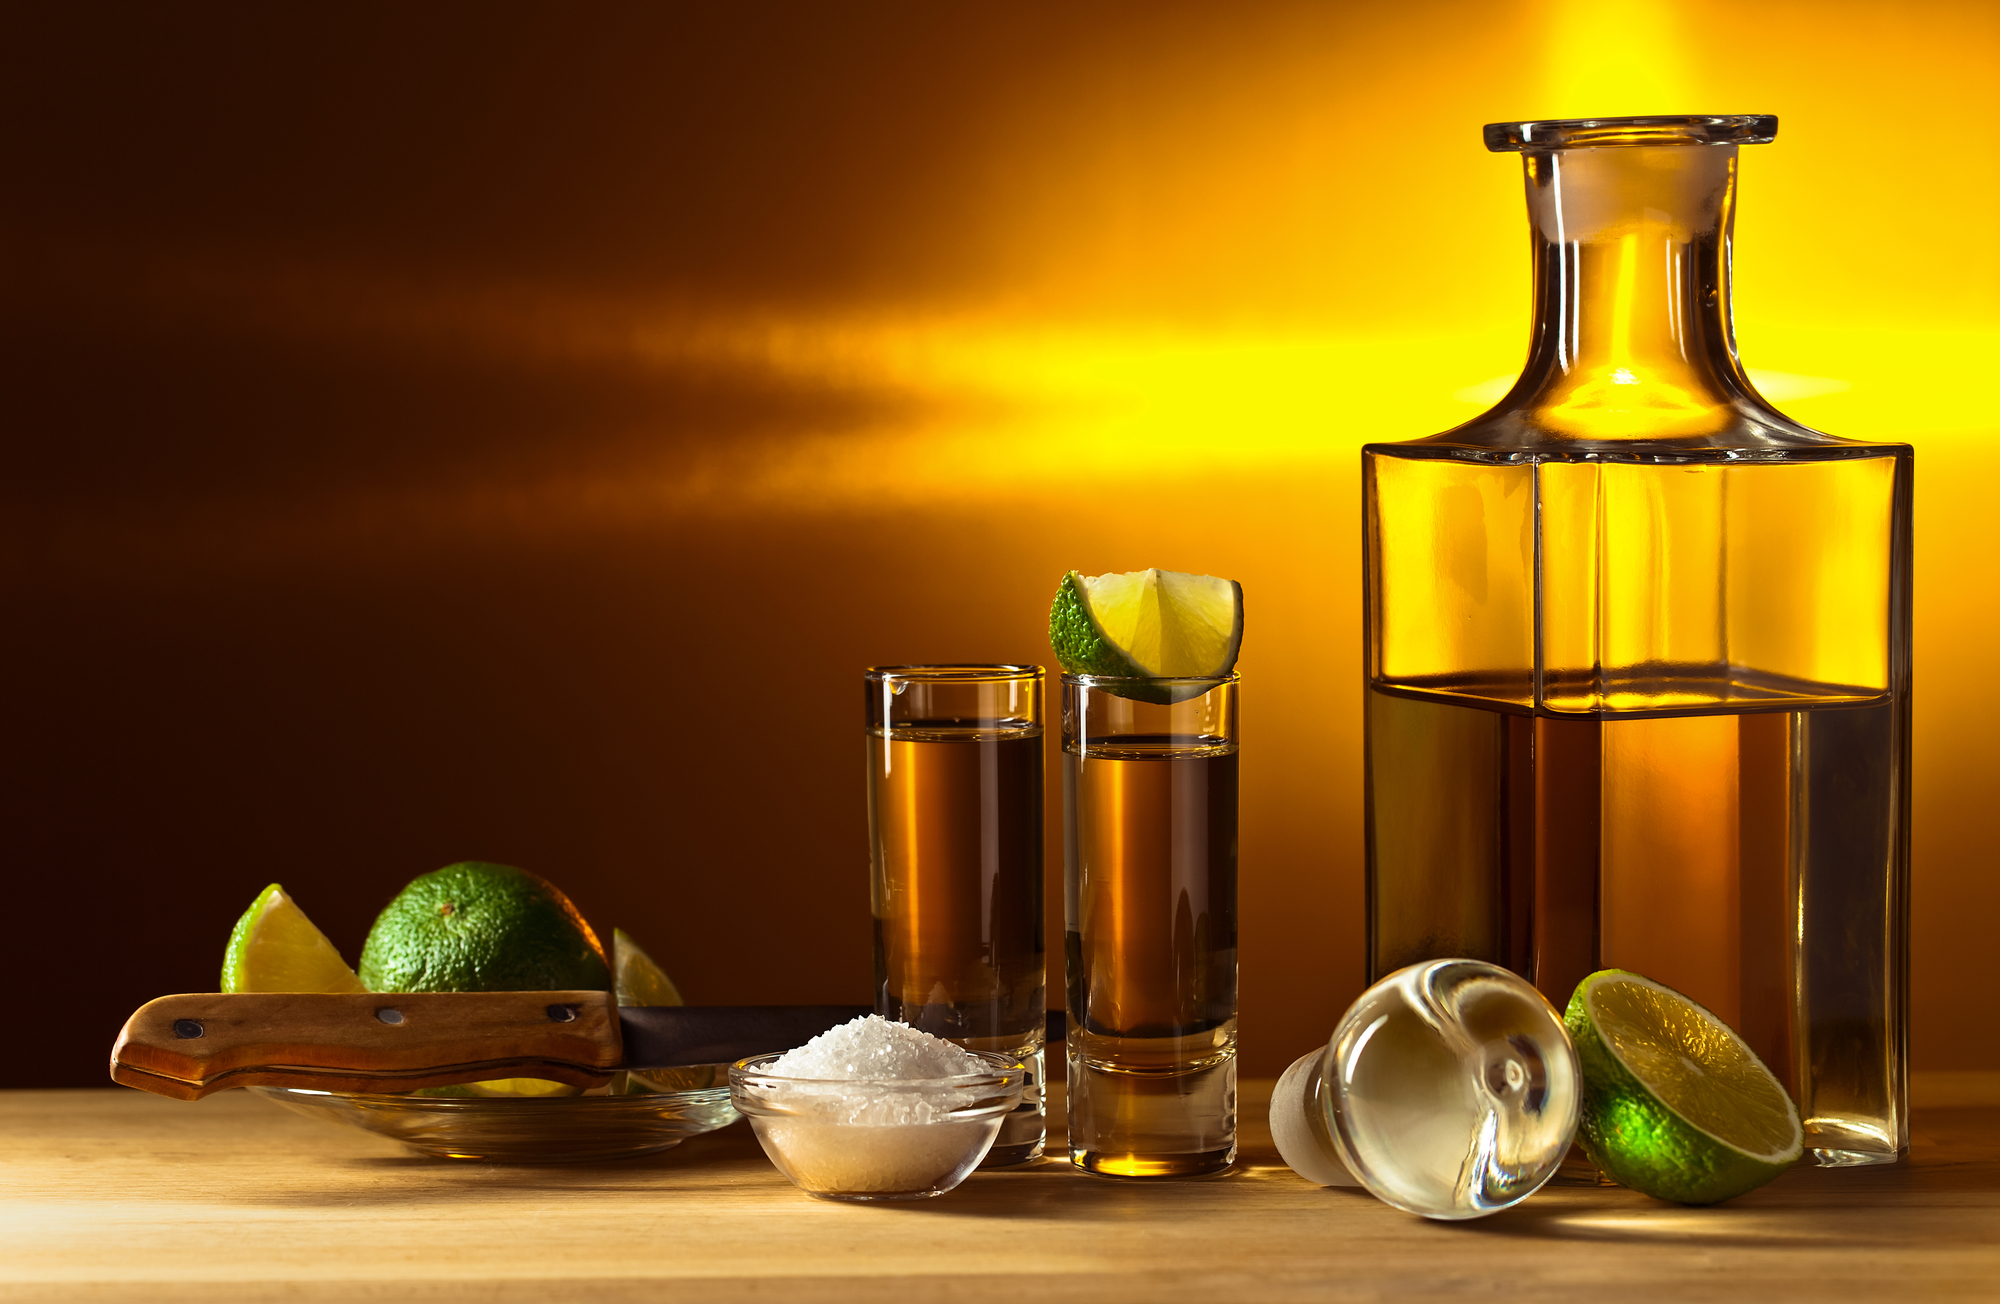 Tequila: The Essence of Mexico